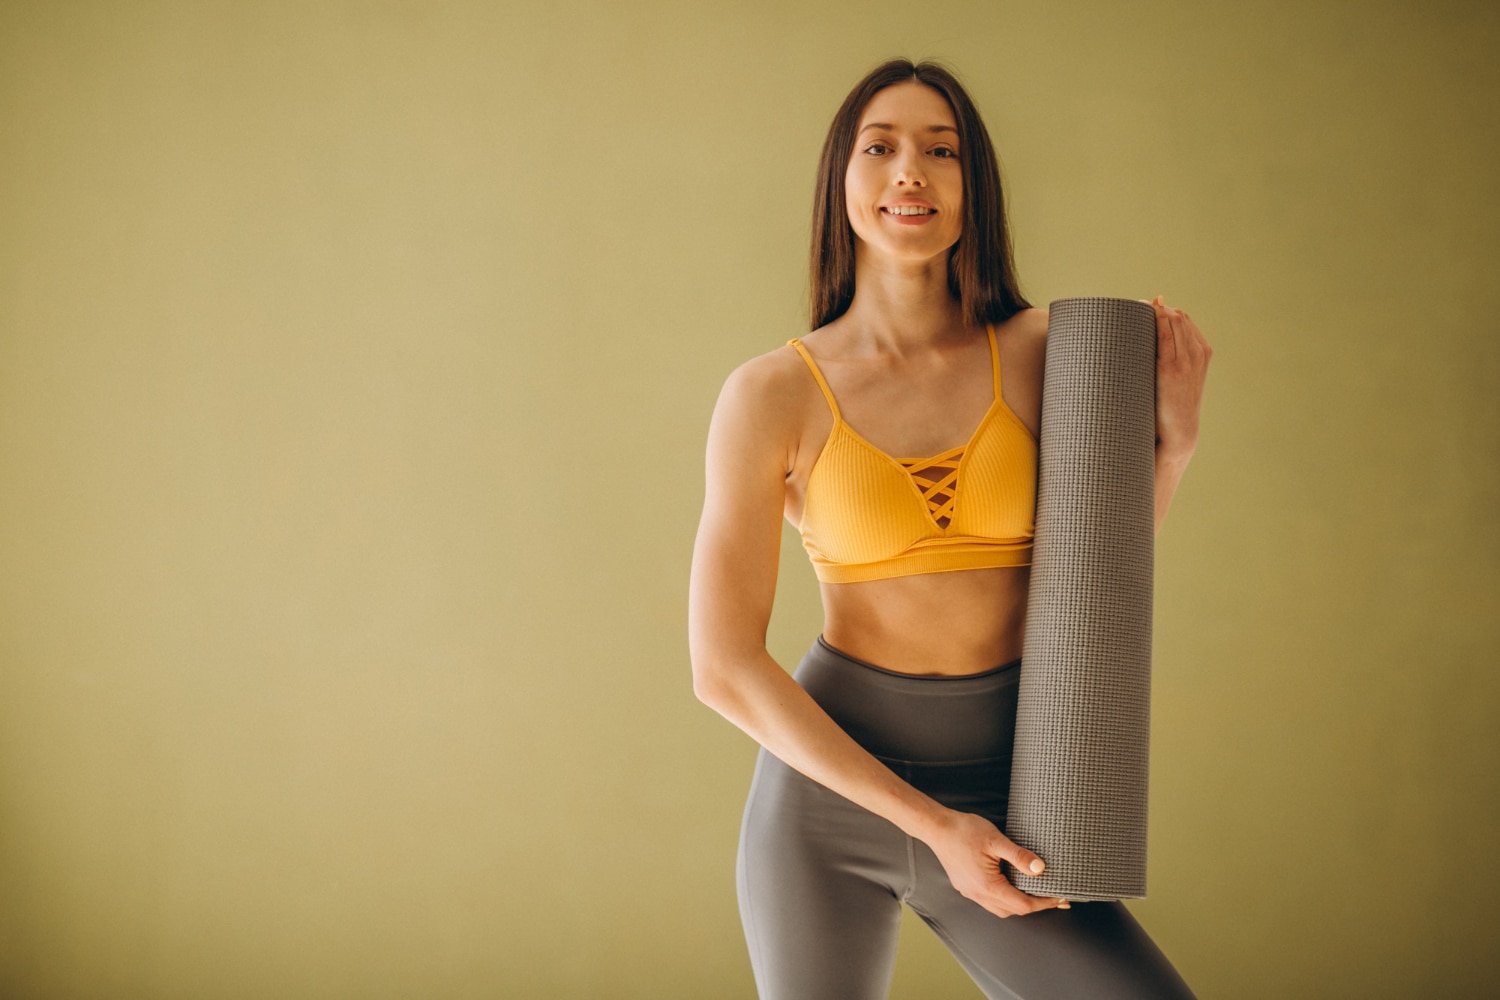 Support Your Body’s Health With Copper Compression’s Compression Wear